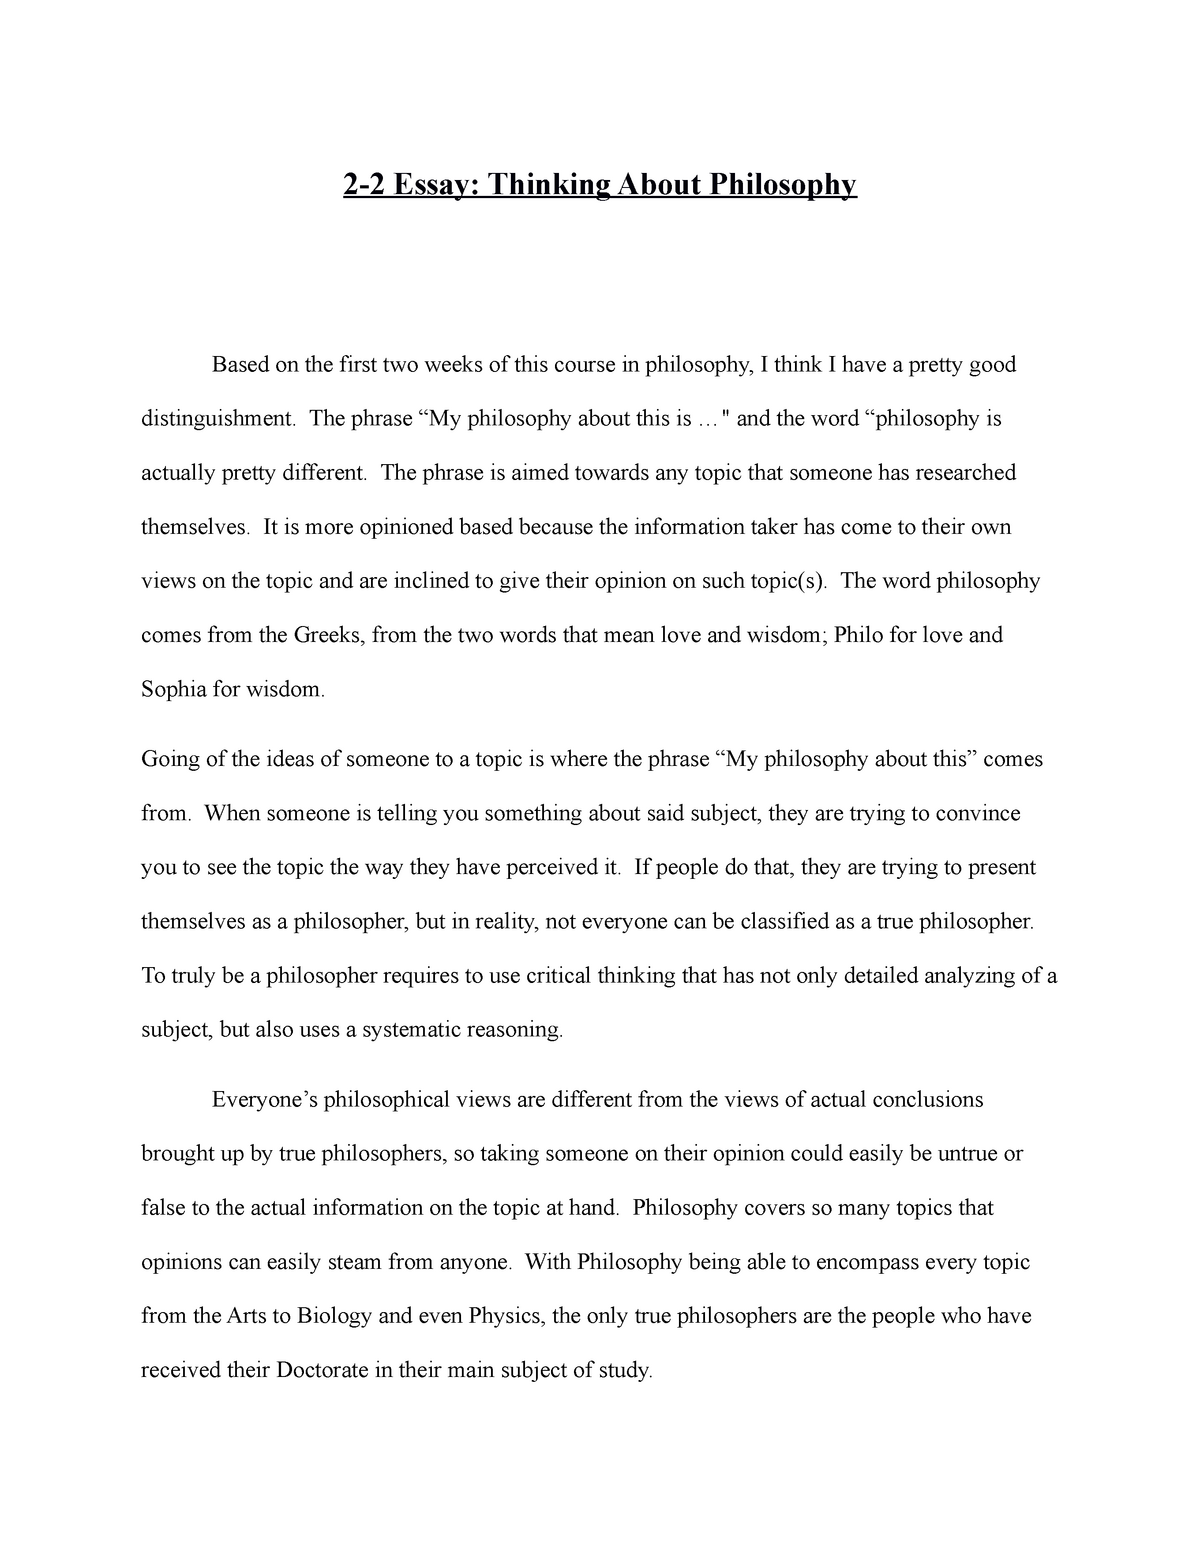 importance of studying philosophy essay